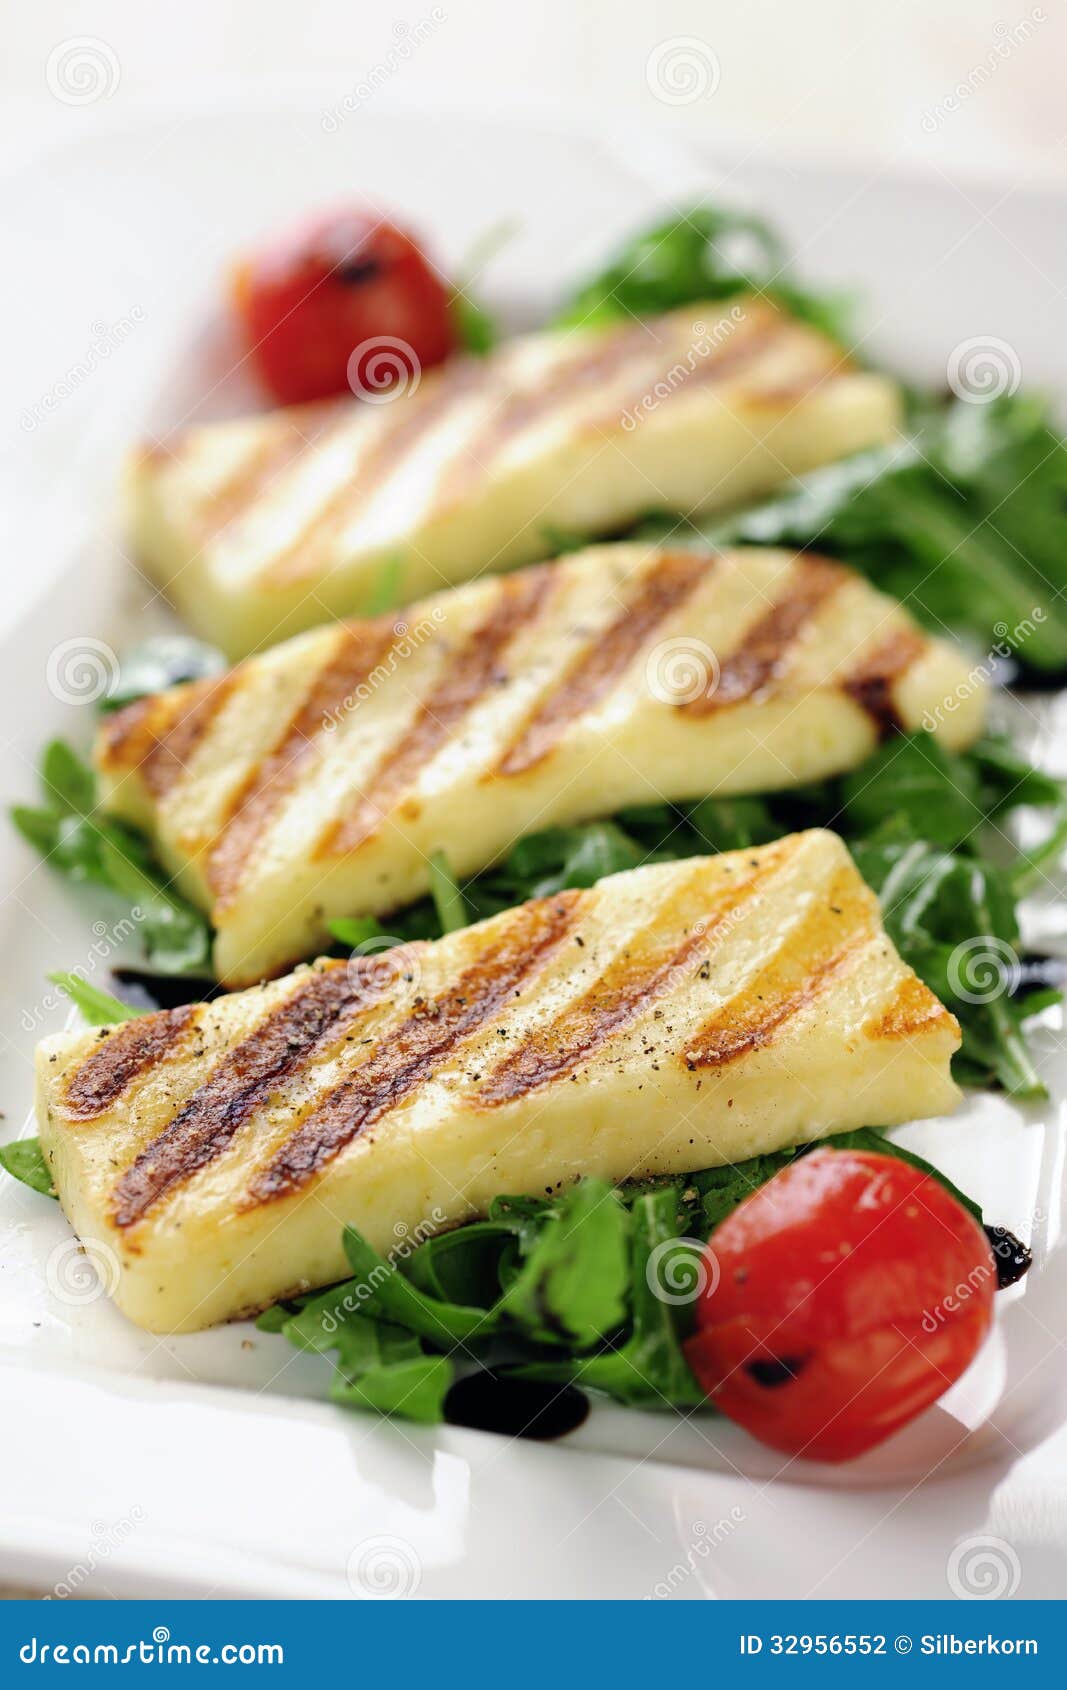 Grilled Halloumi cheese on rocket salad, selective focus